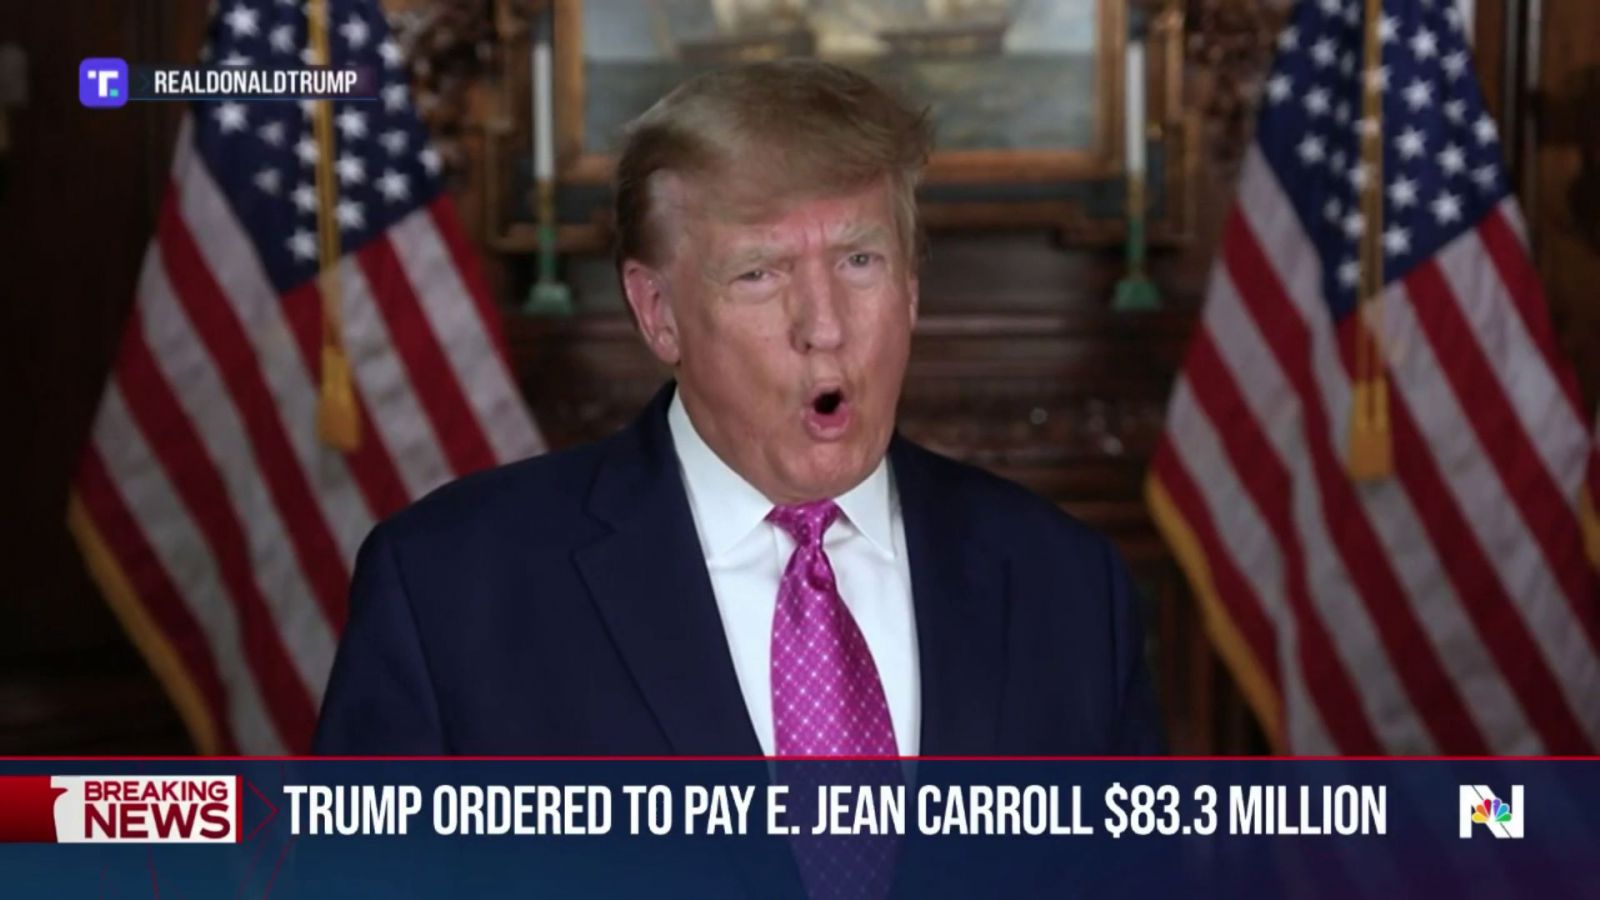 VIDEO Jury orders Trump to pay E. Jean Carroll $83.3 million in defamation damages